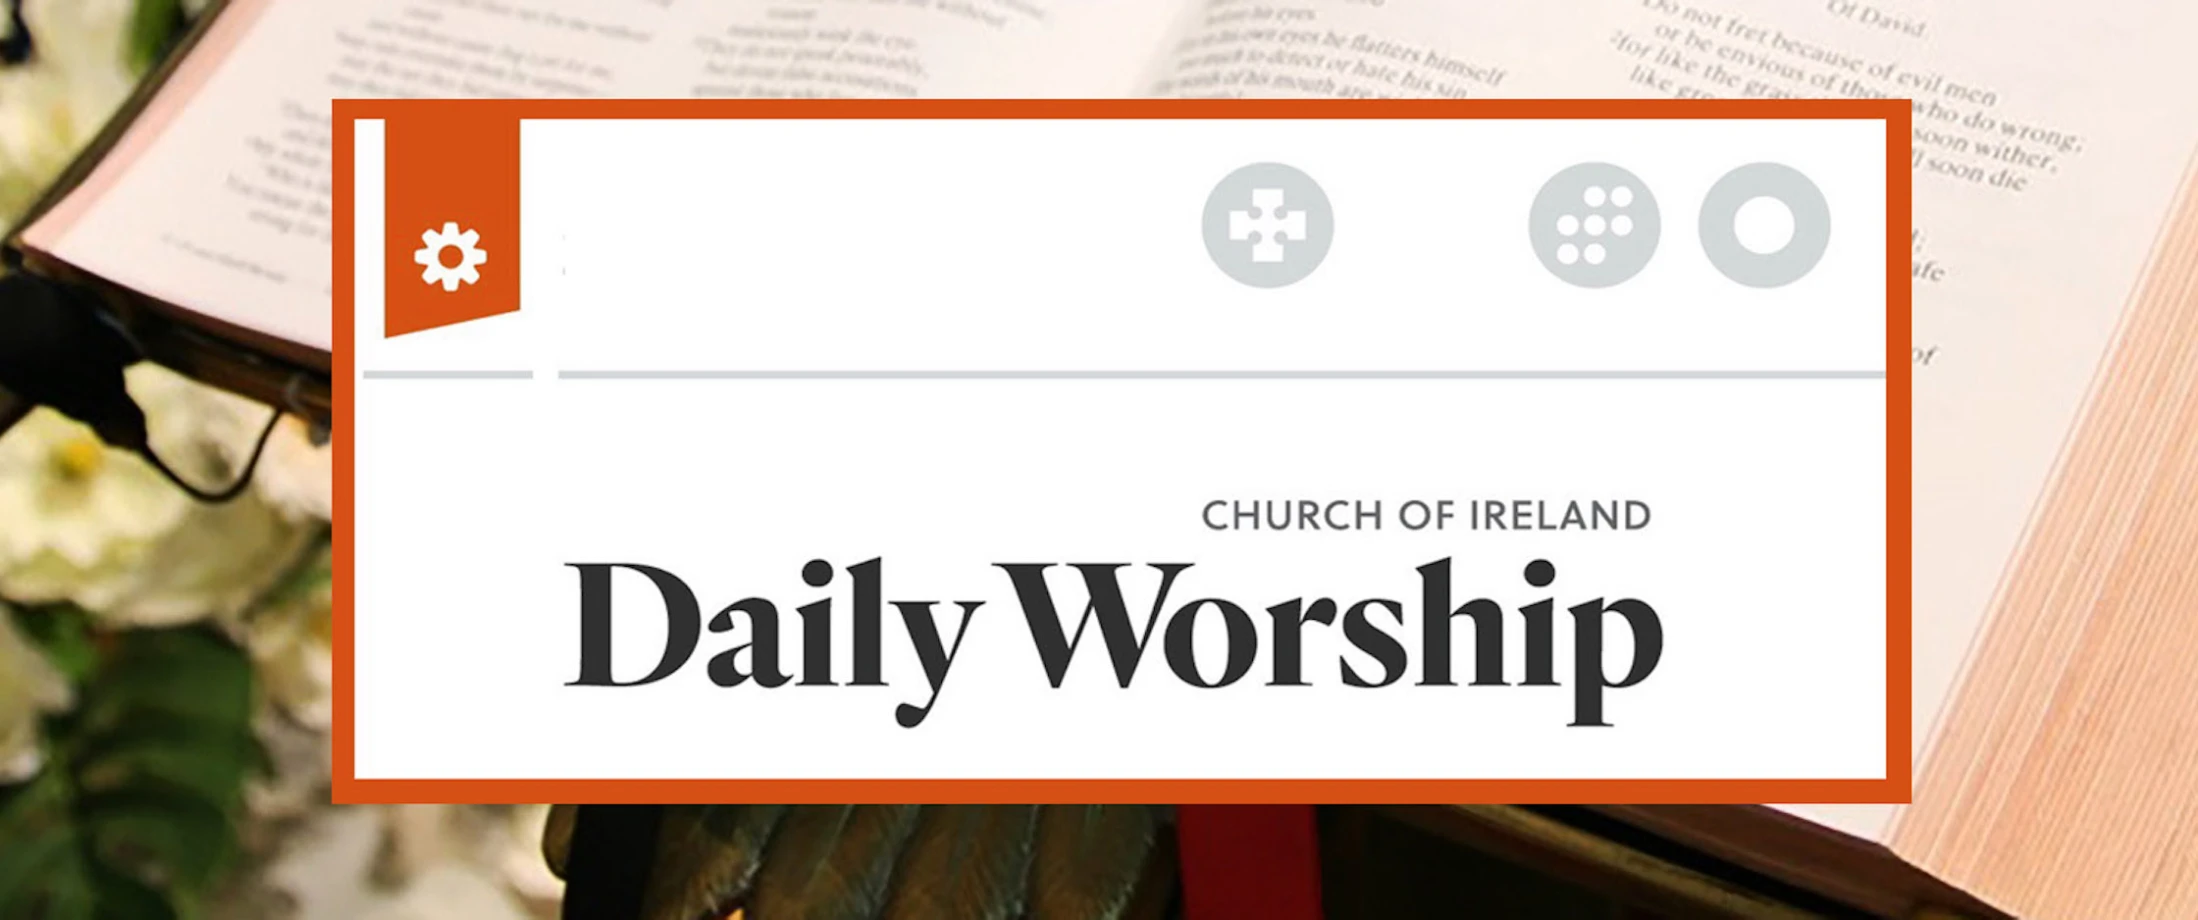 Check out the Daily Worship App